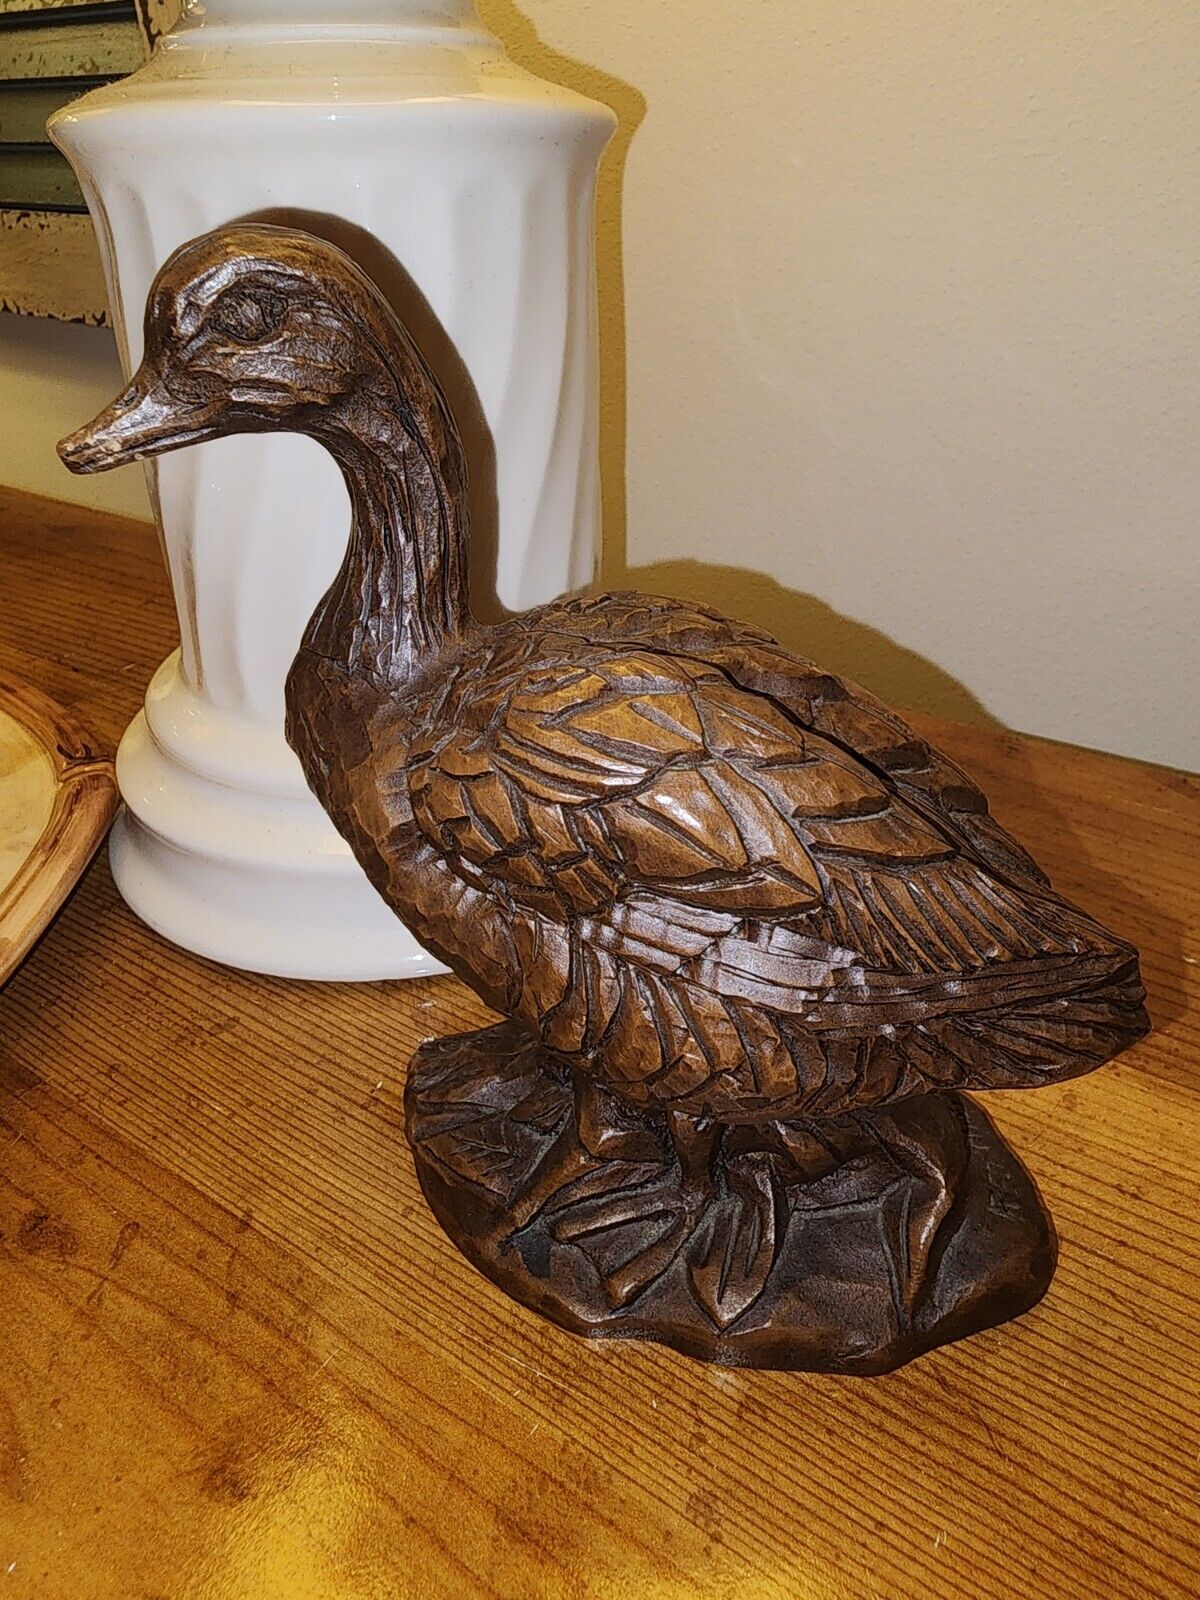 Vintage  Duck  Figurine. Very Detailed.  Excellent Condition.